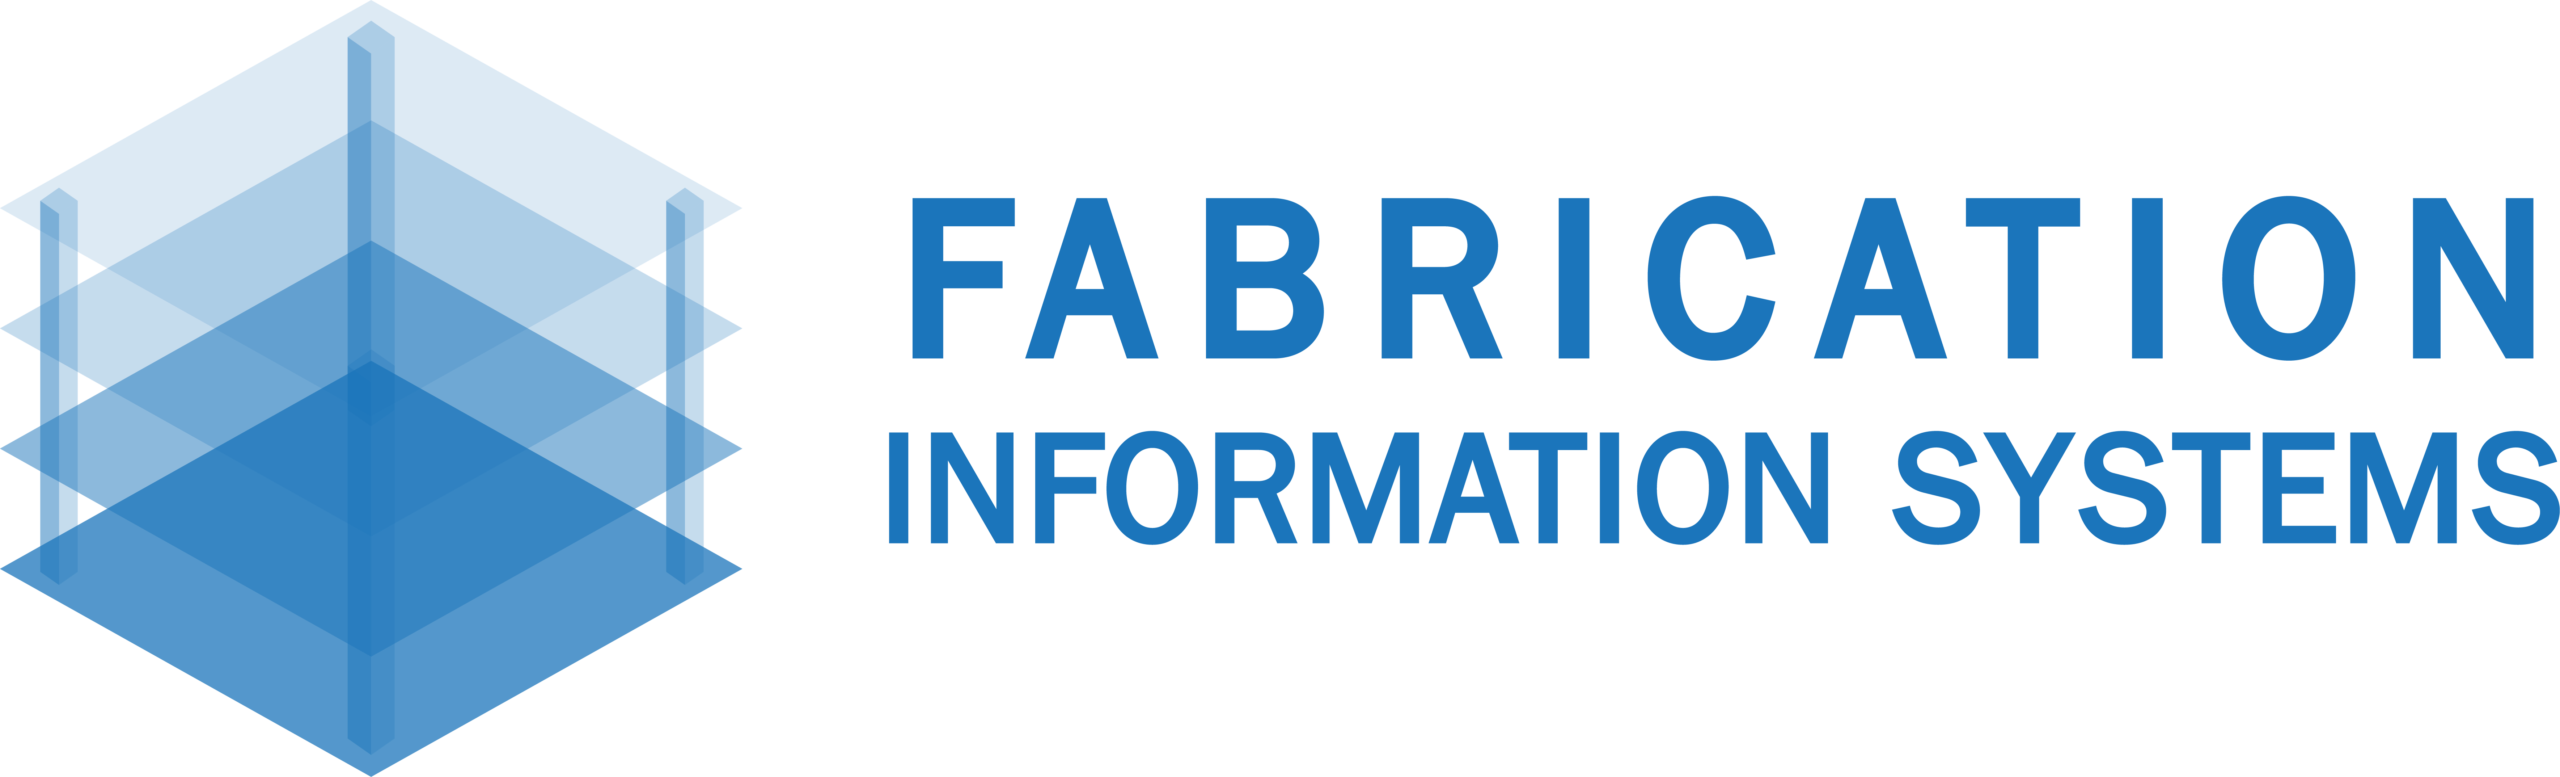 Fabrication Information Systems